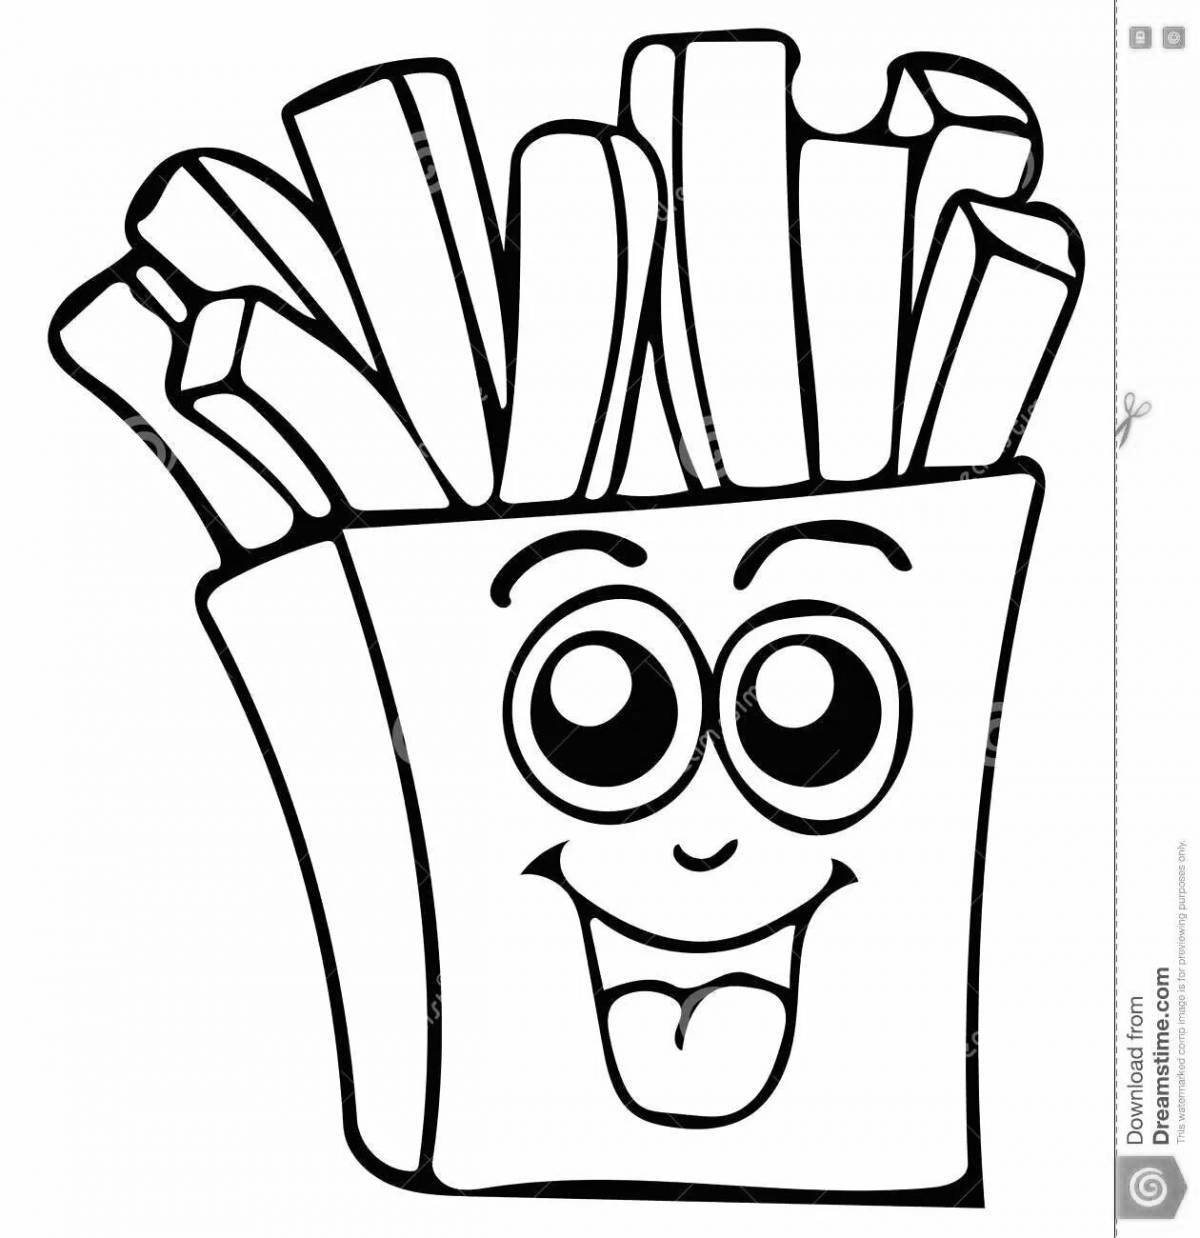 Cute french fries coloring book for kids